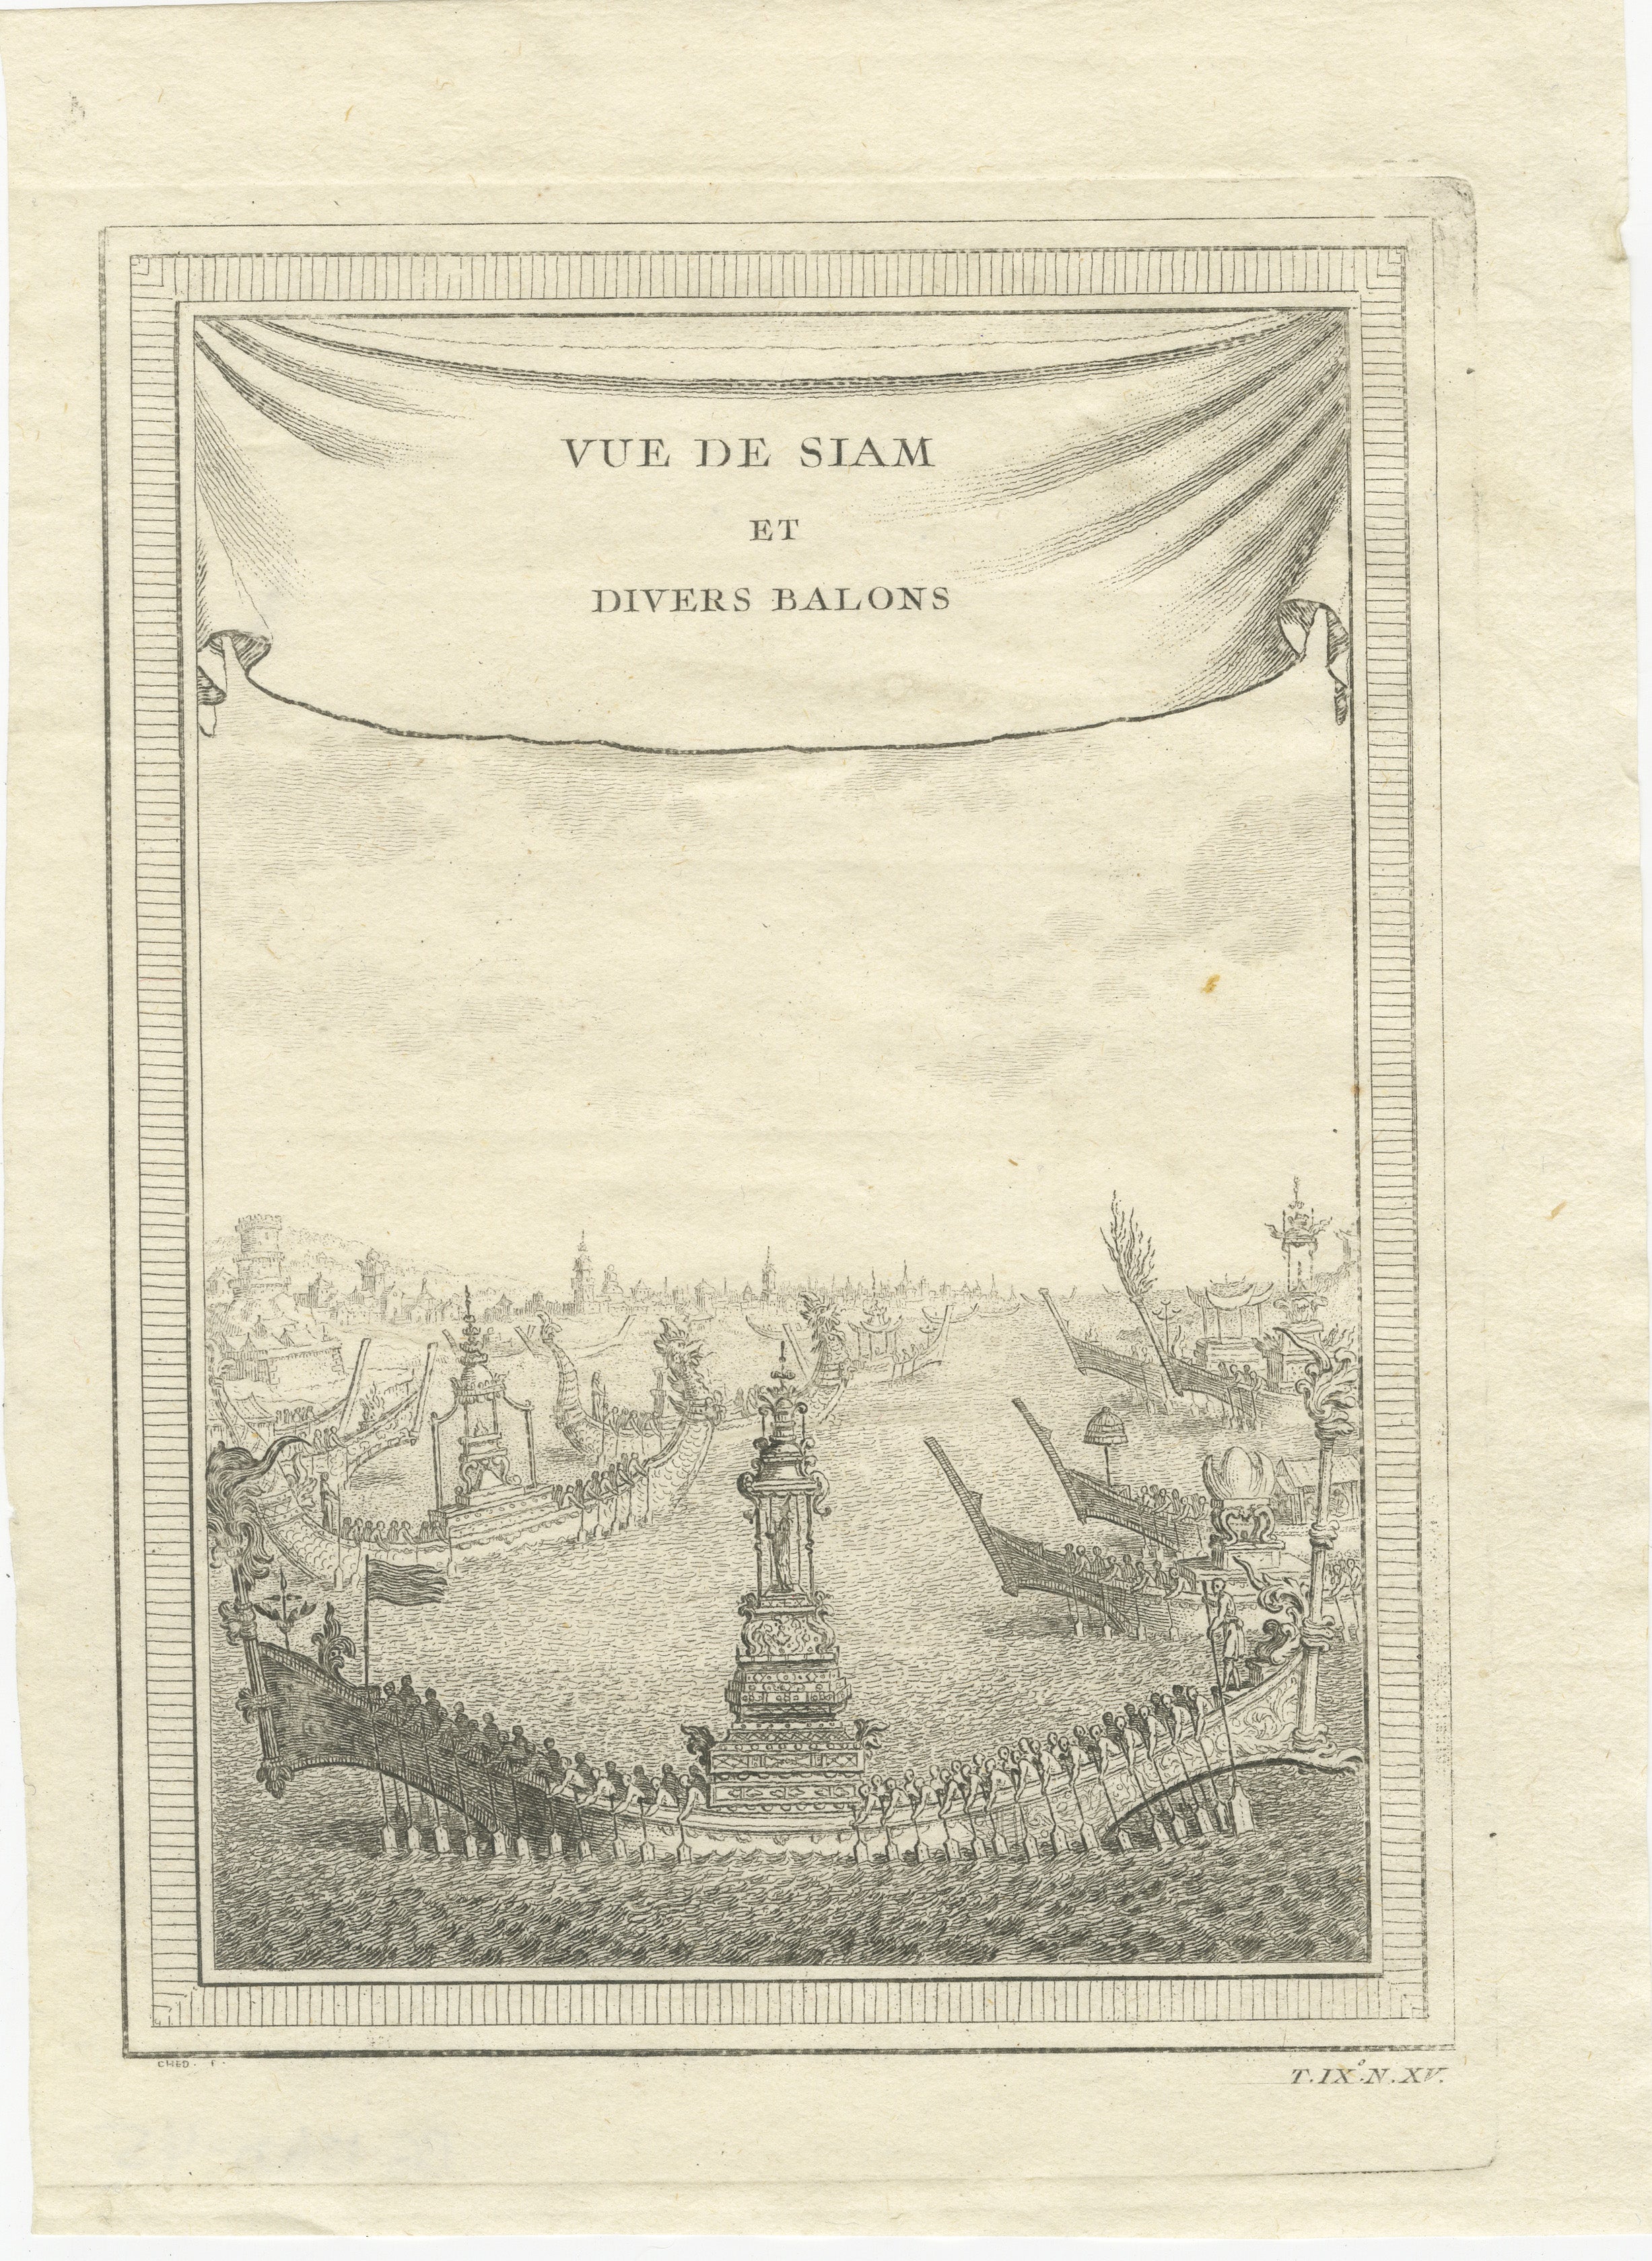 An original engraving featuring a view of Siam, which is present-day Thailand, specifically a view of the city of Ayutthaya with numerous boats depicted on the river. The title, 